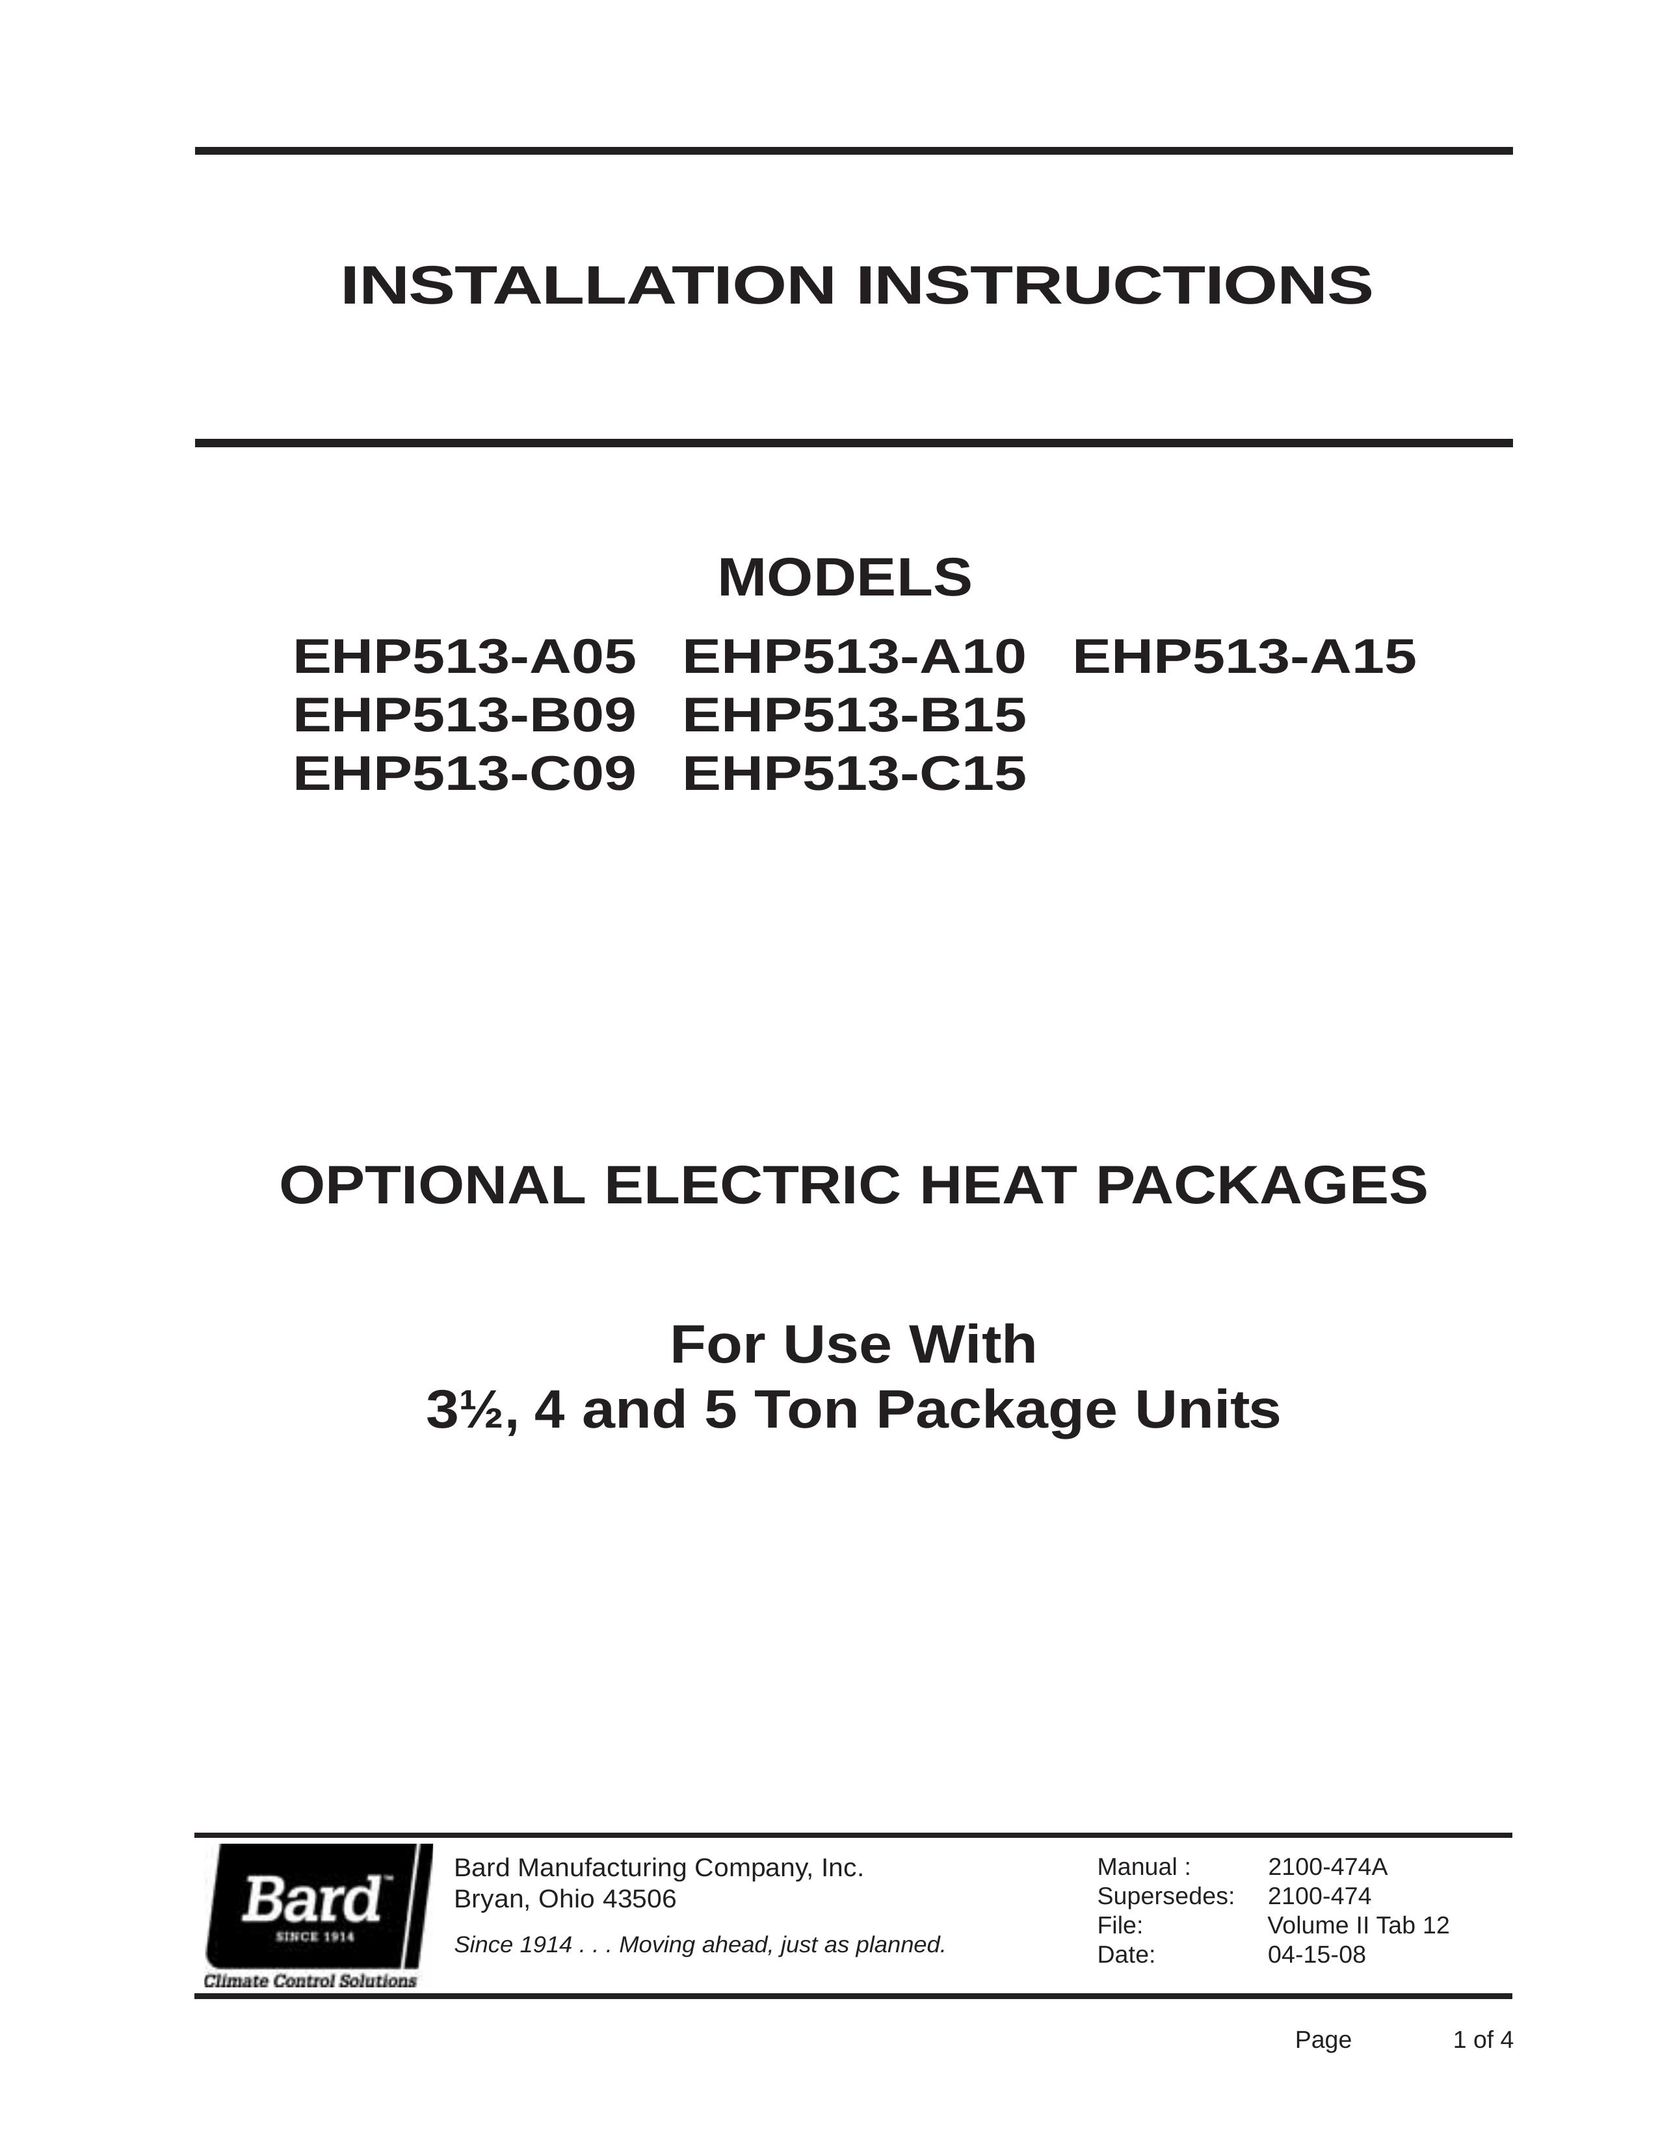 Bard EHP513-A15 Heating System User Manual